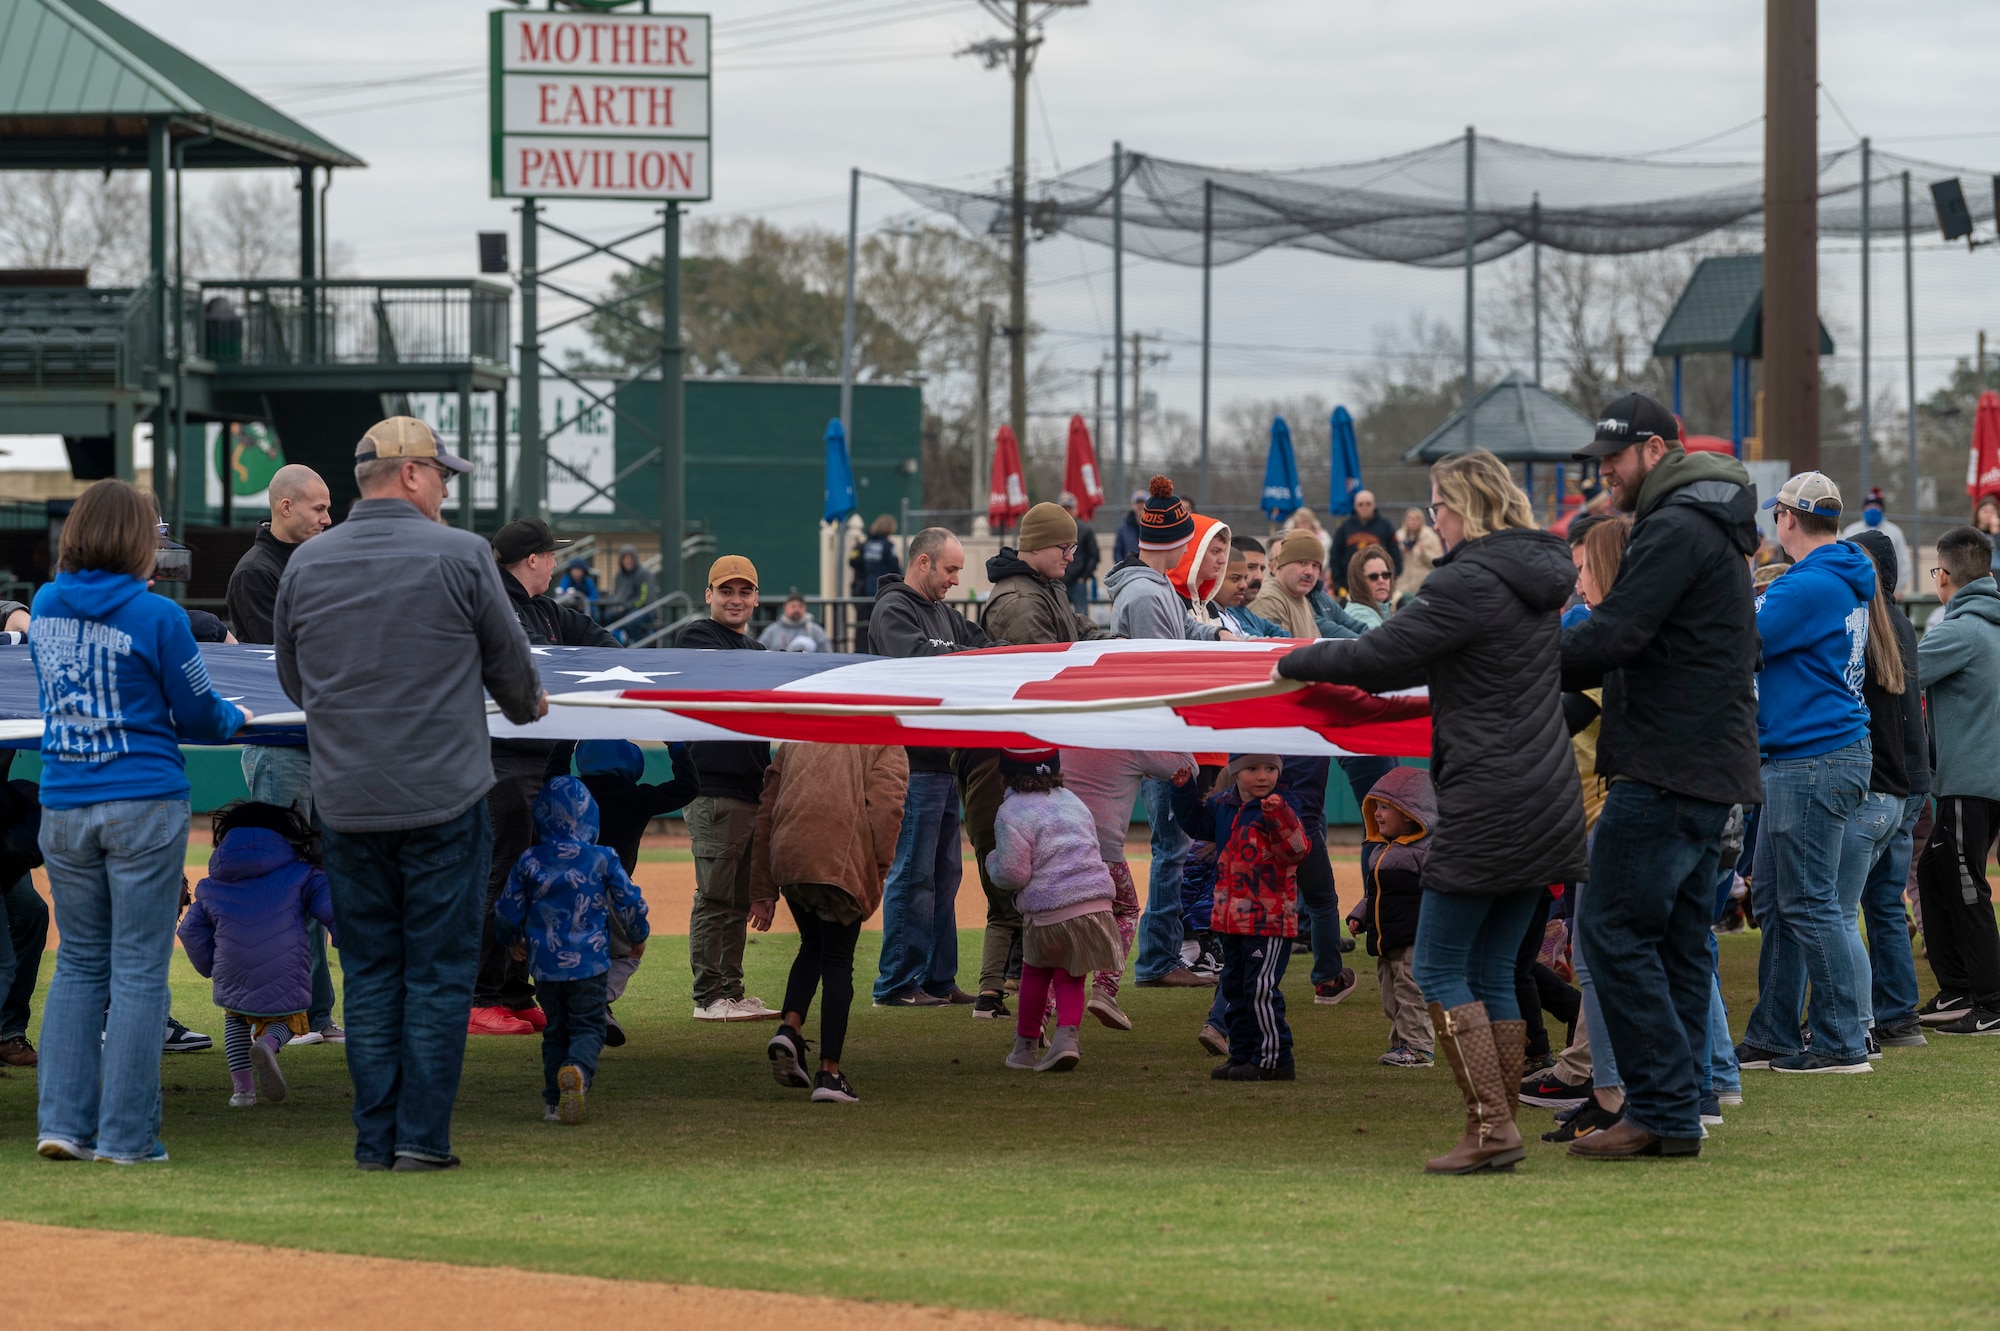 Airmen from Seymour Johnson Air Force Base hold the American Flag during the 12th Annual Freedom Classic baseball series at Grainger Stadium in Kinston, North Carolina, on Feb. 26, 2022. Airmen held the flag during the singing of the National Anthem, which was accompanied by an F-15E Strike Eagle flyover. (U.S. Air Force photo by Airman 1st Class Kevin Holloway)